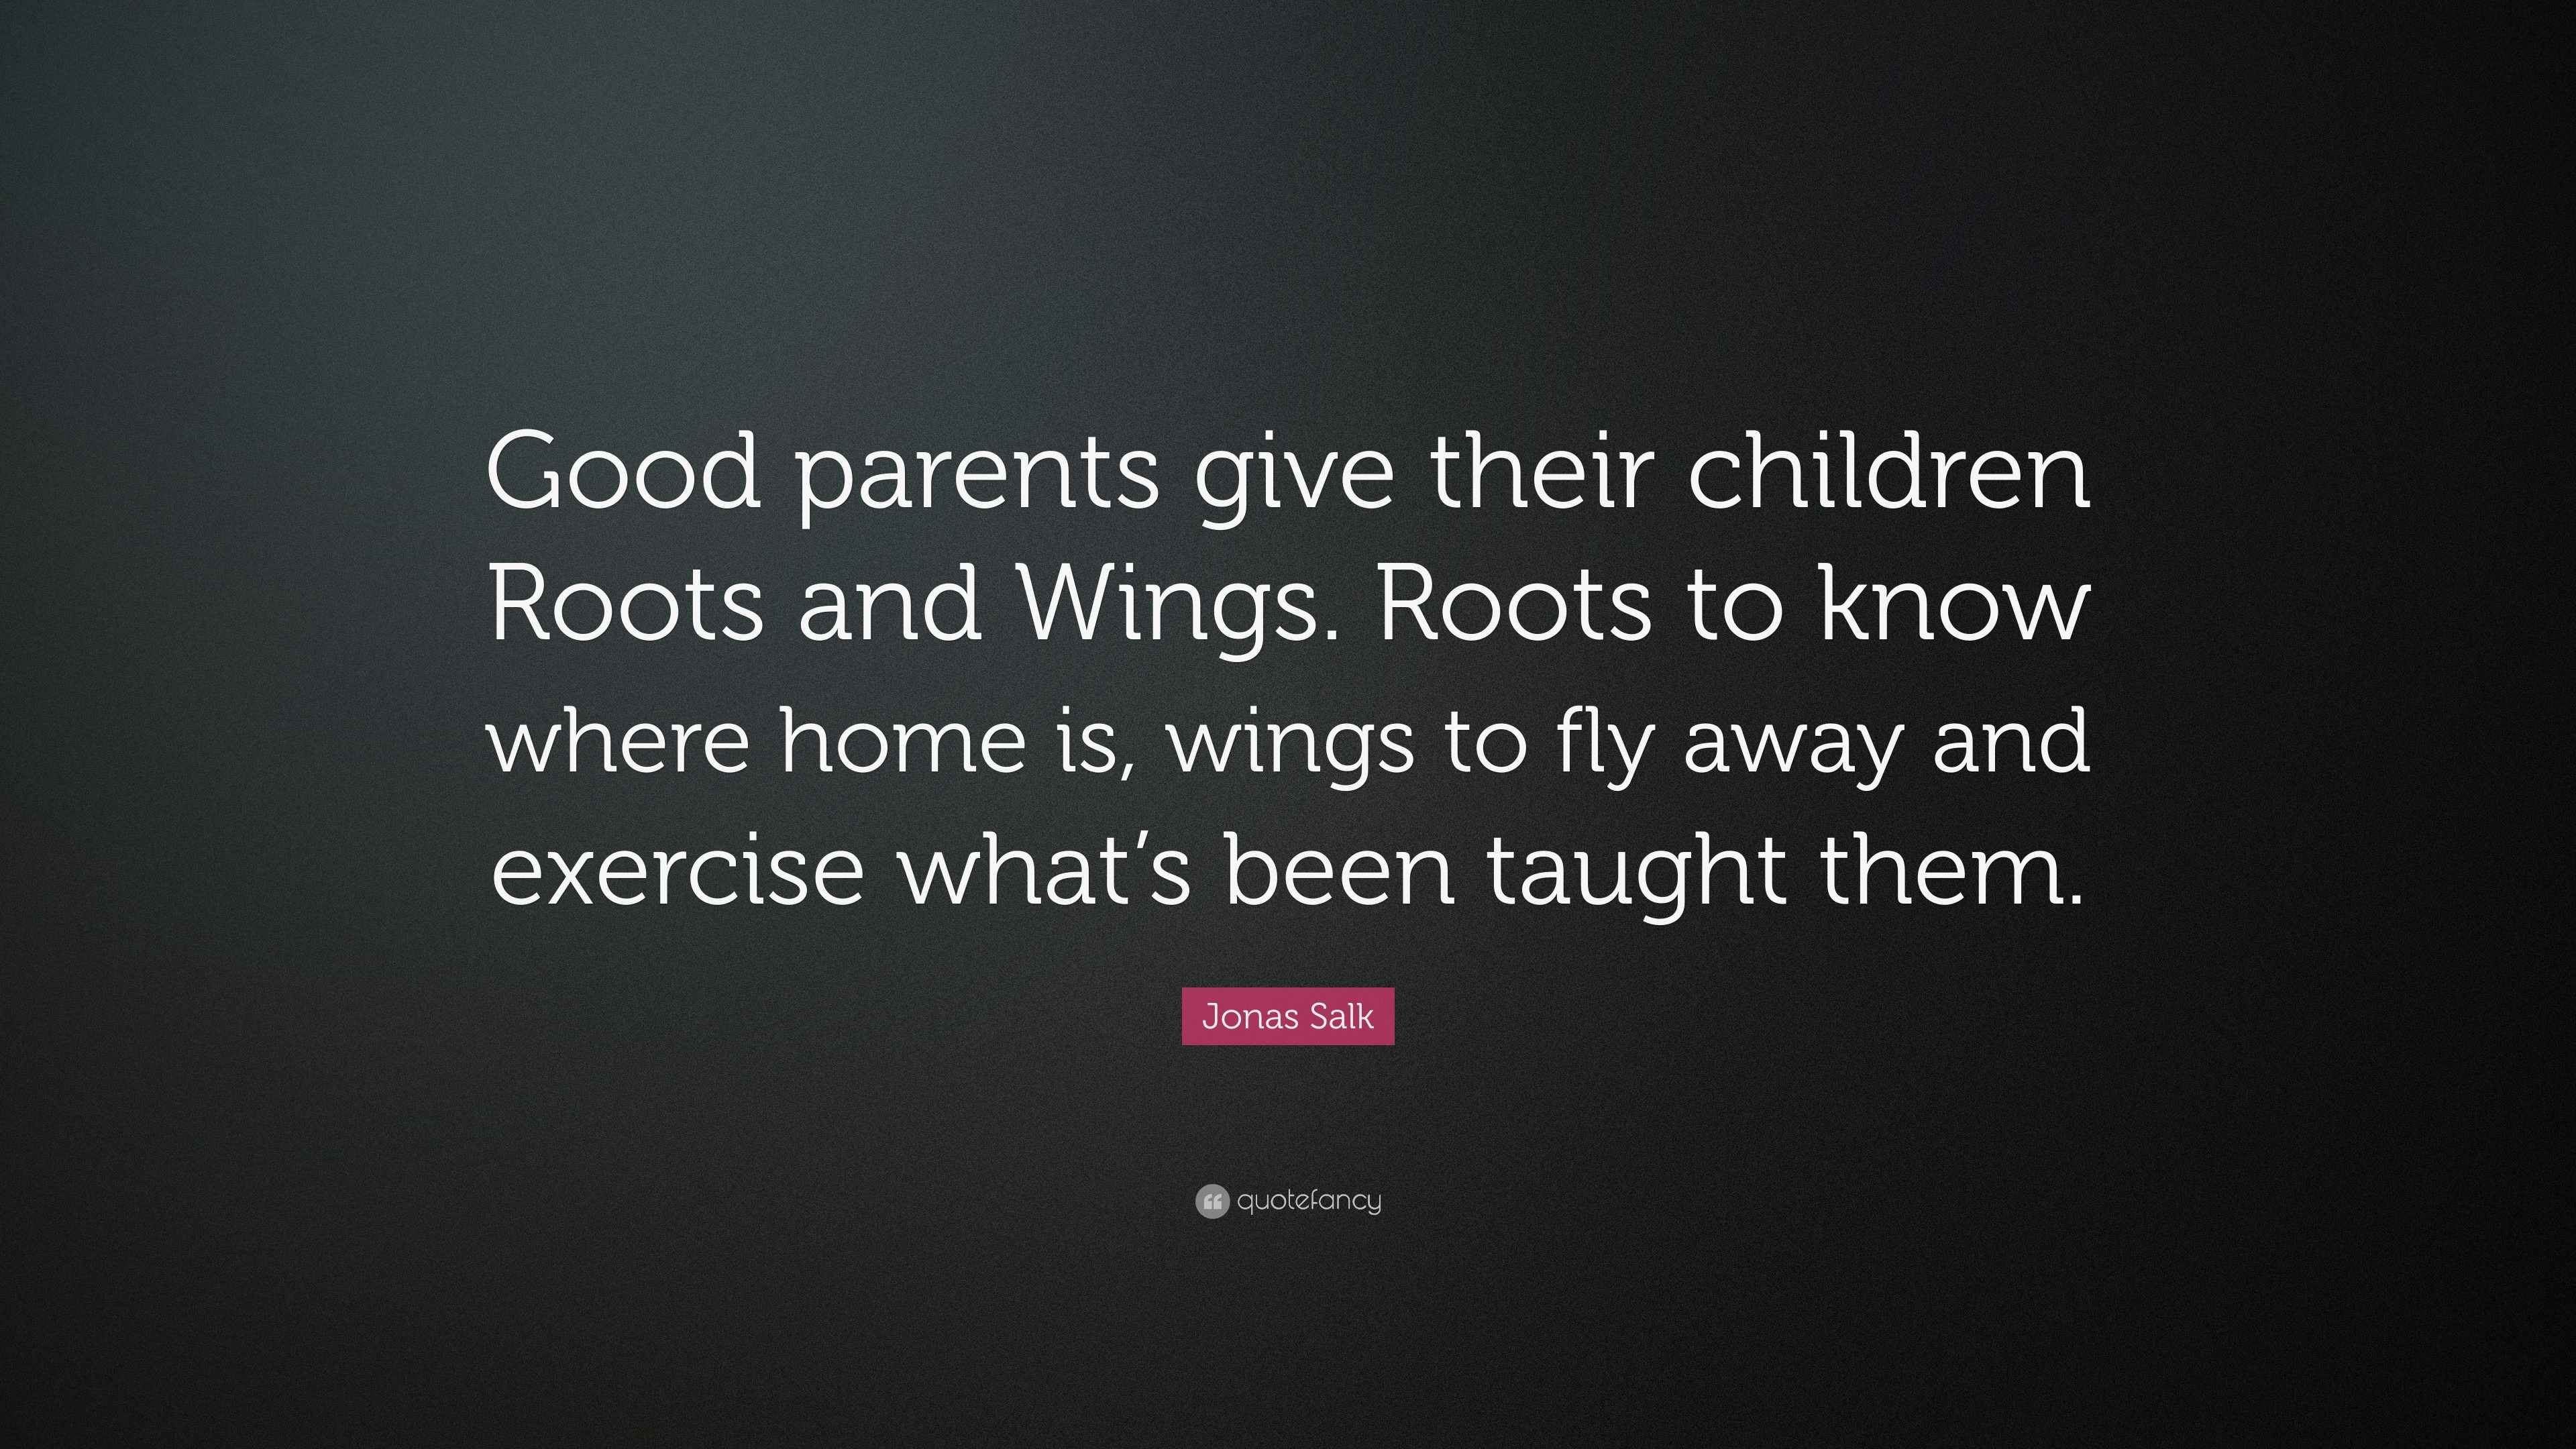 Jonas Salk Quote: "Good parents give their children Roots and Wings. Roots to know where home is ...